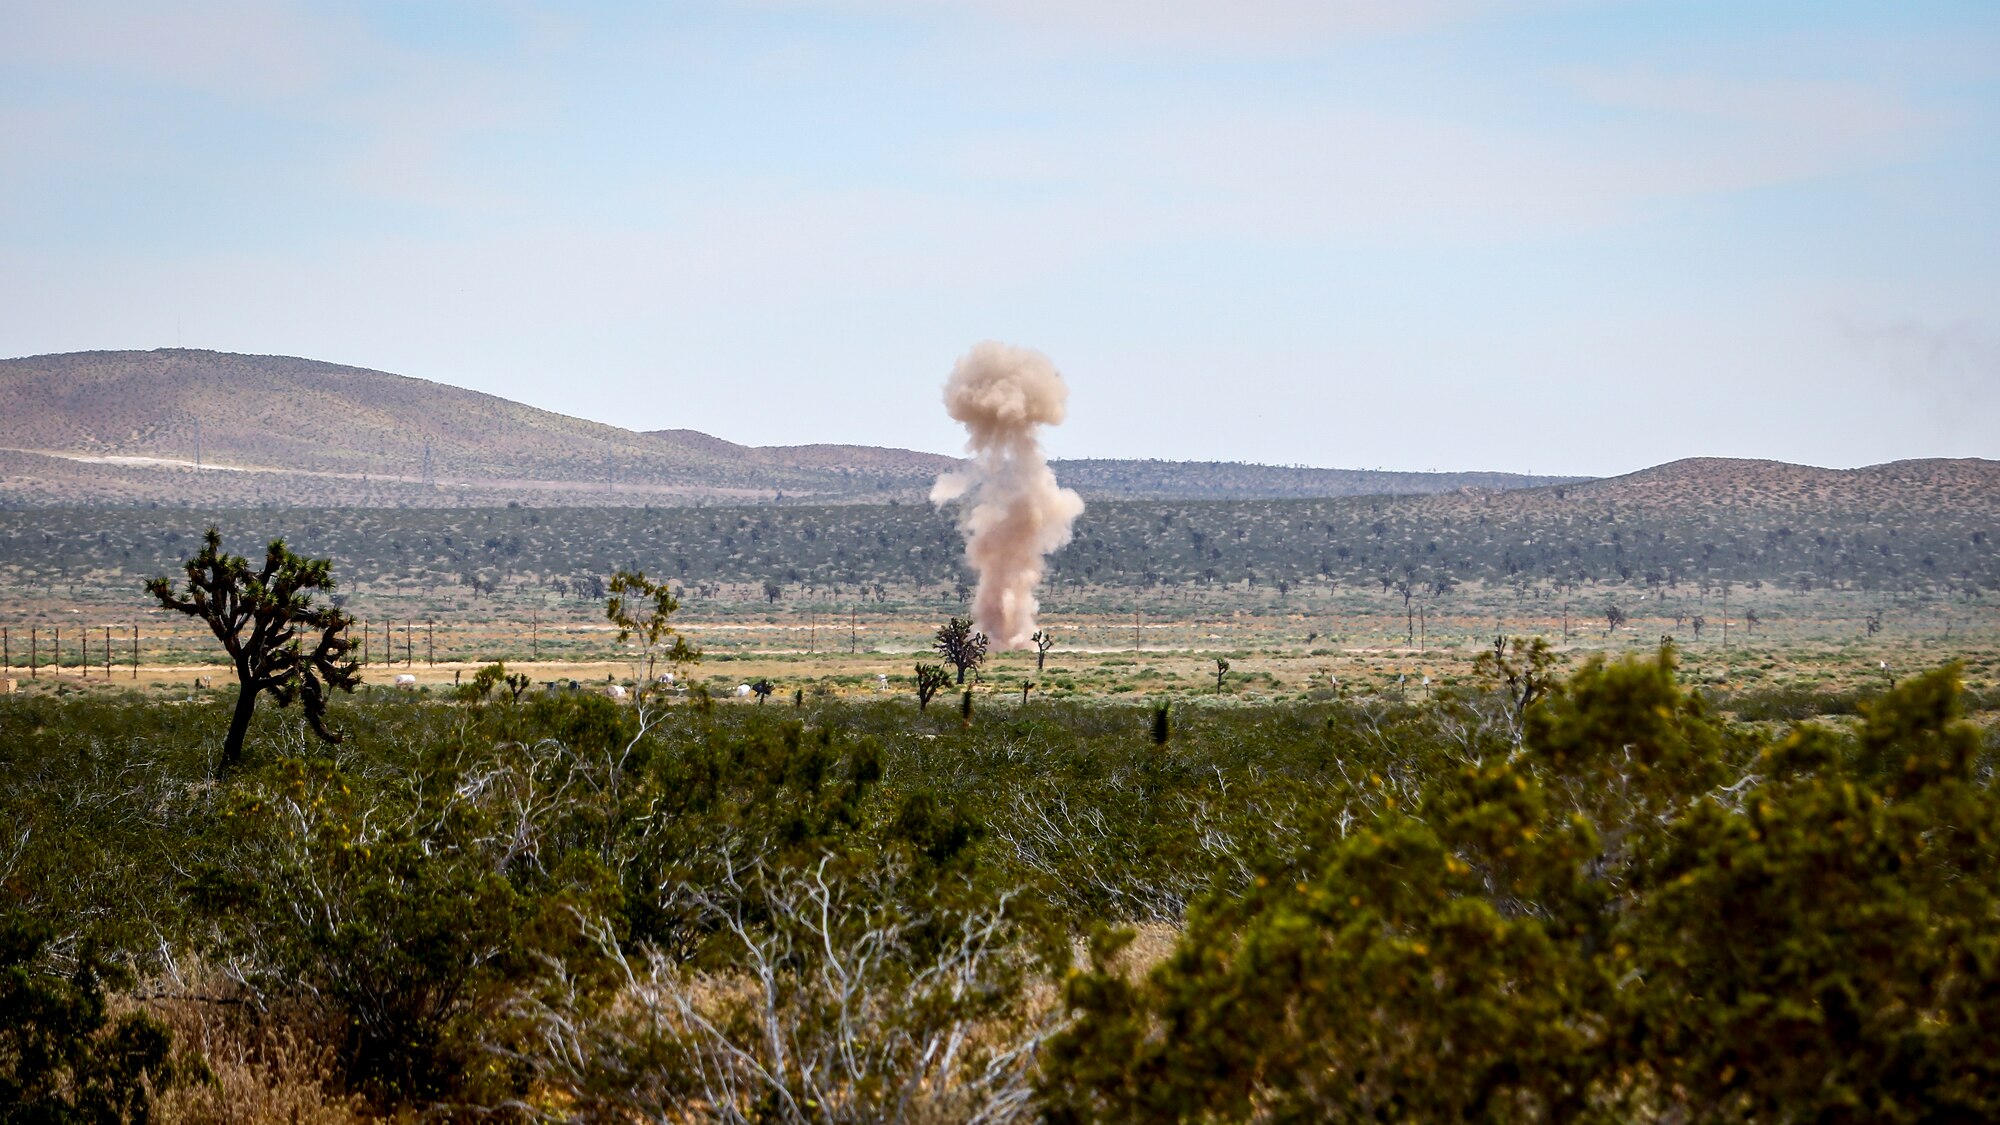 A mushroom cloud rises from the desert floor as members of the Explosive Ordnance Disposal unit, 812th Civil Engineer Squadron, 412th Test Wing, detonate unexploded ordnance and training munitions at the Precision Impact Range Area at Edwards Air Force Base, California, May 7. The 412th Test Wing uses the PIRA to conduct weapons and payload drops for flight tests. (Air Force photo by Giancarlo Casem)